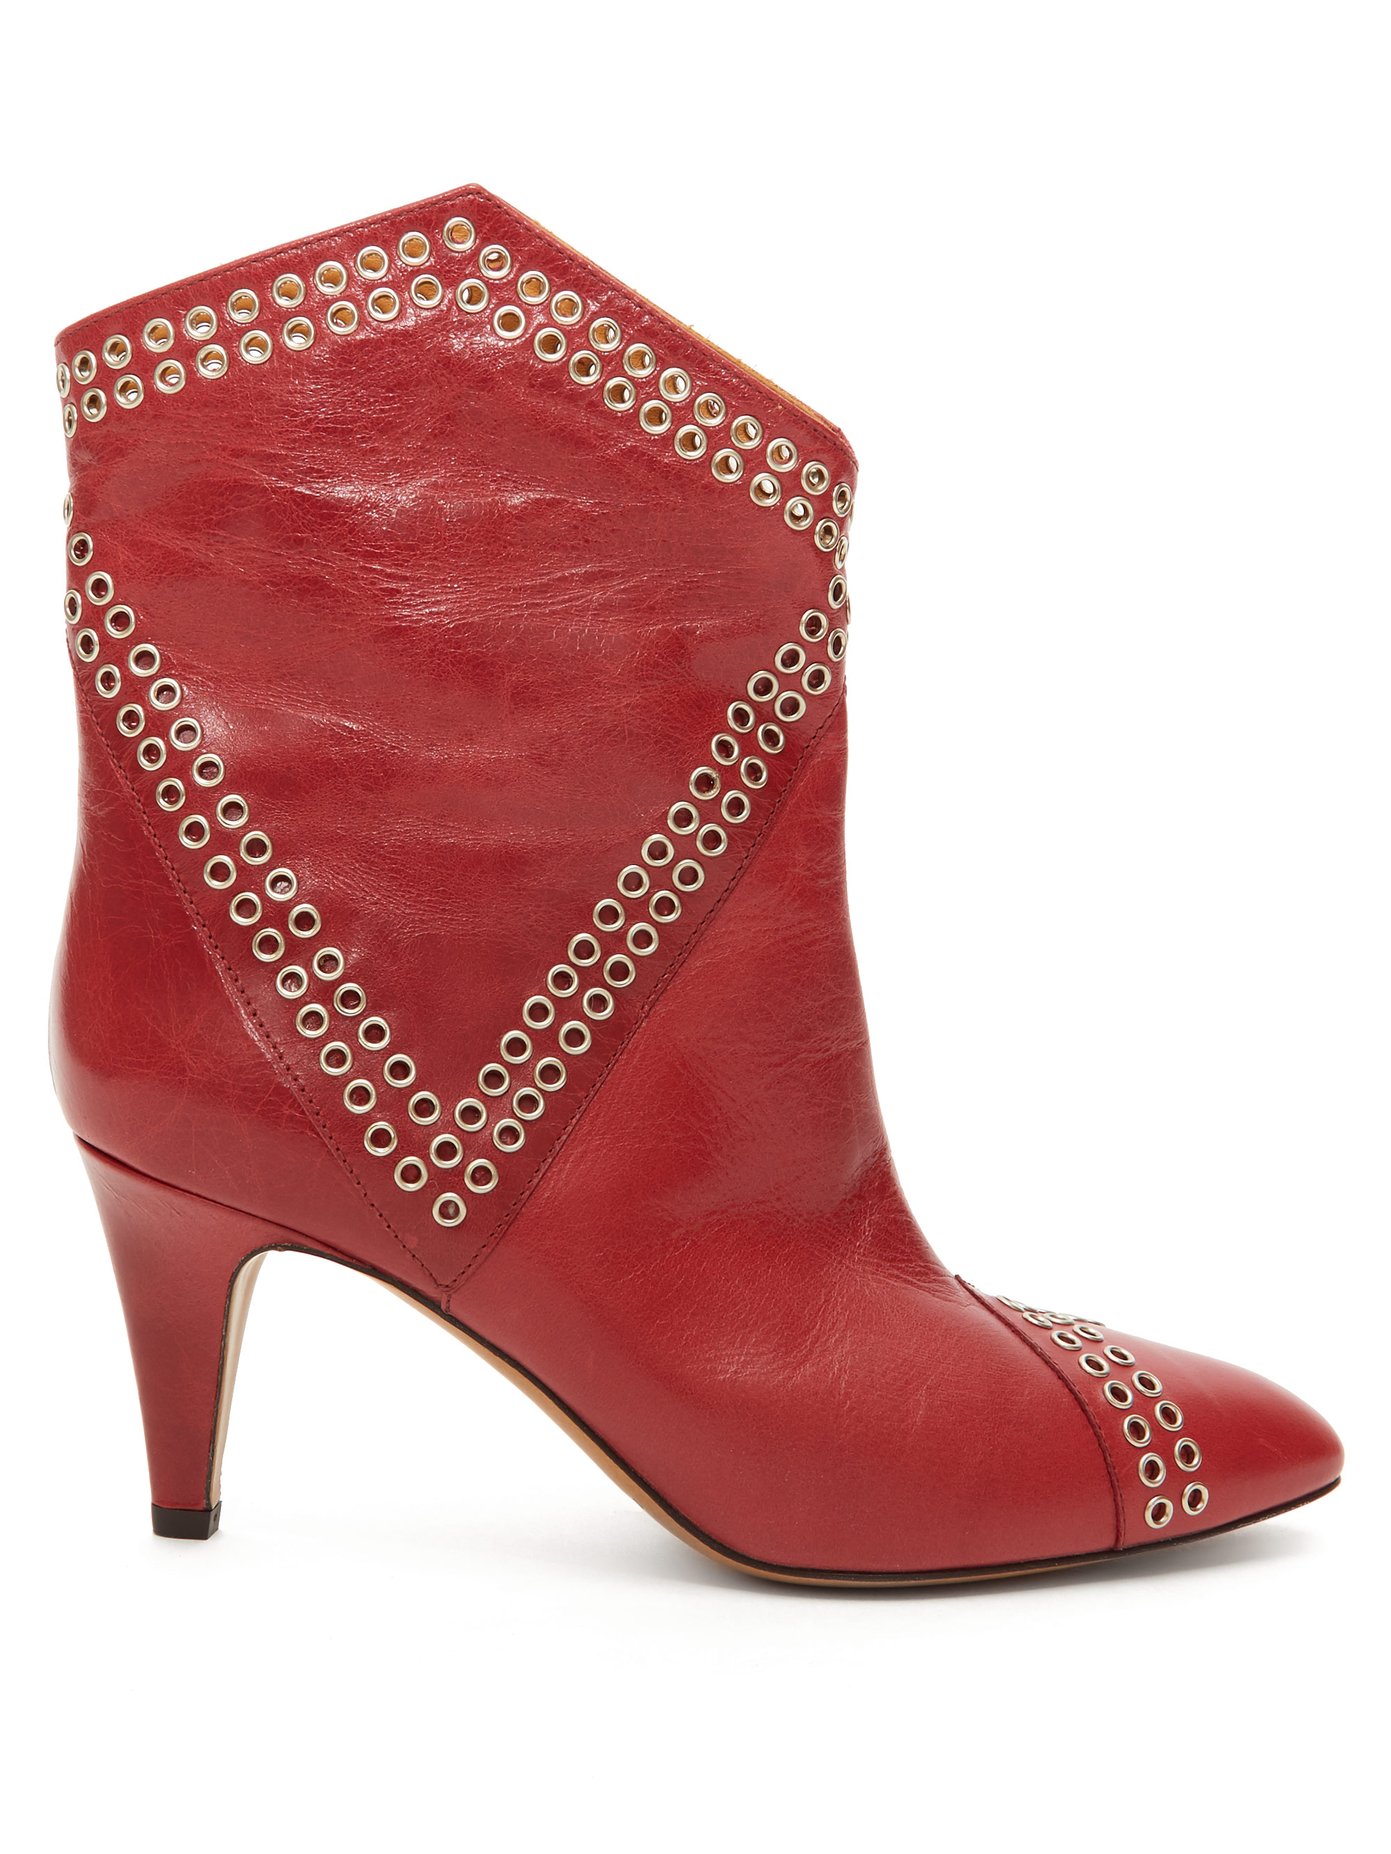 red leather ankle boots uk